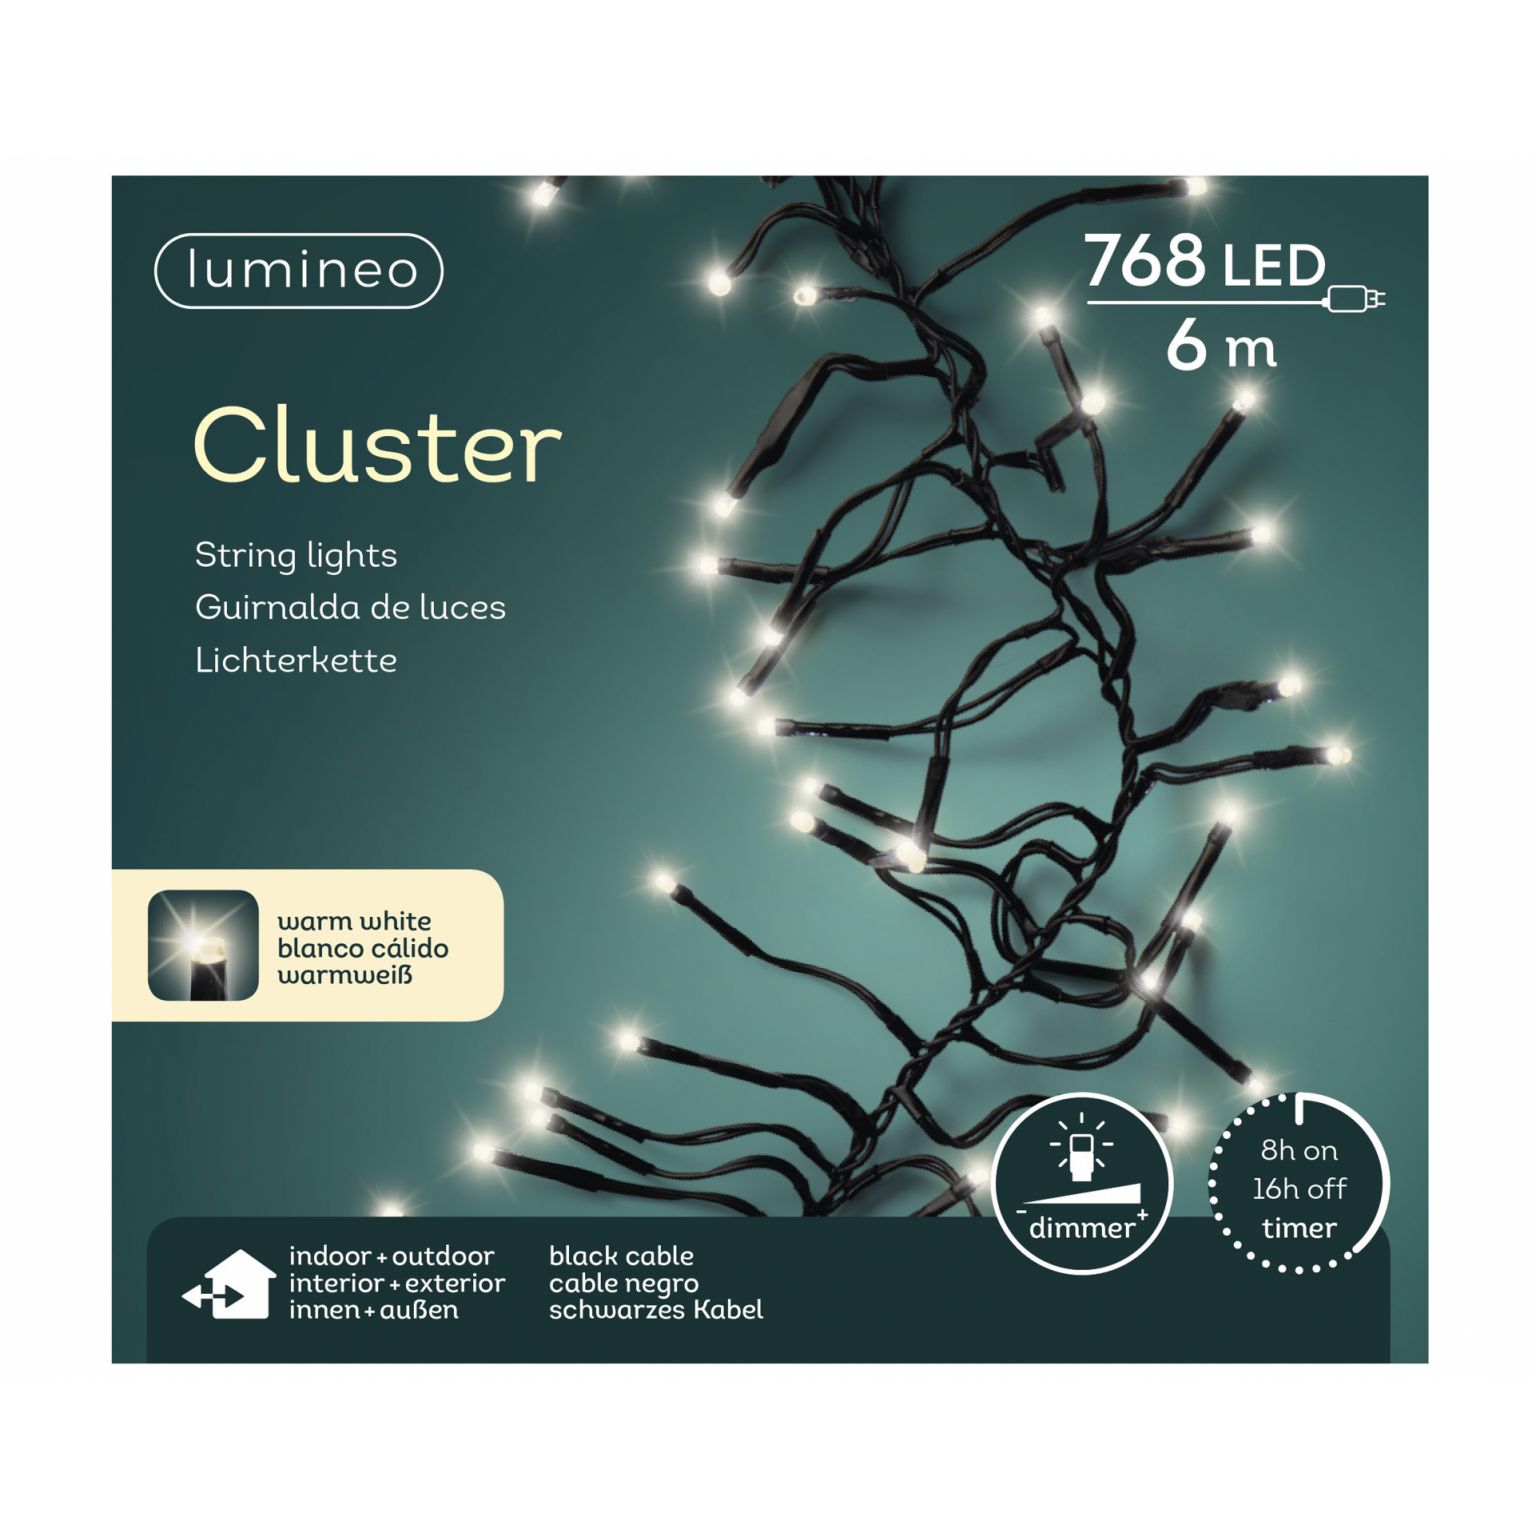 angst Omdat cruise Clusterverlichting lumineo 768-lamps LED 'warm wit' - KerstwinQel.nl